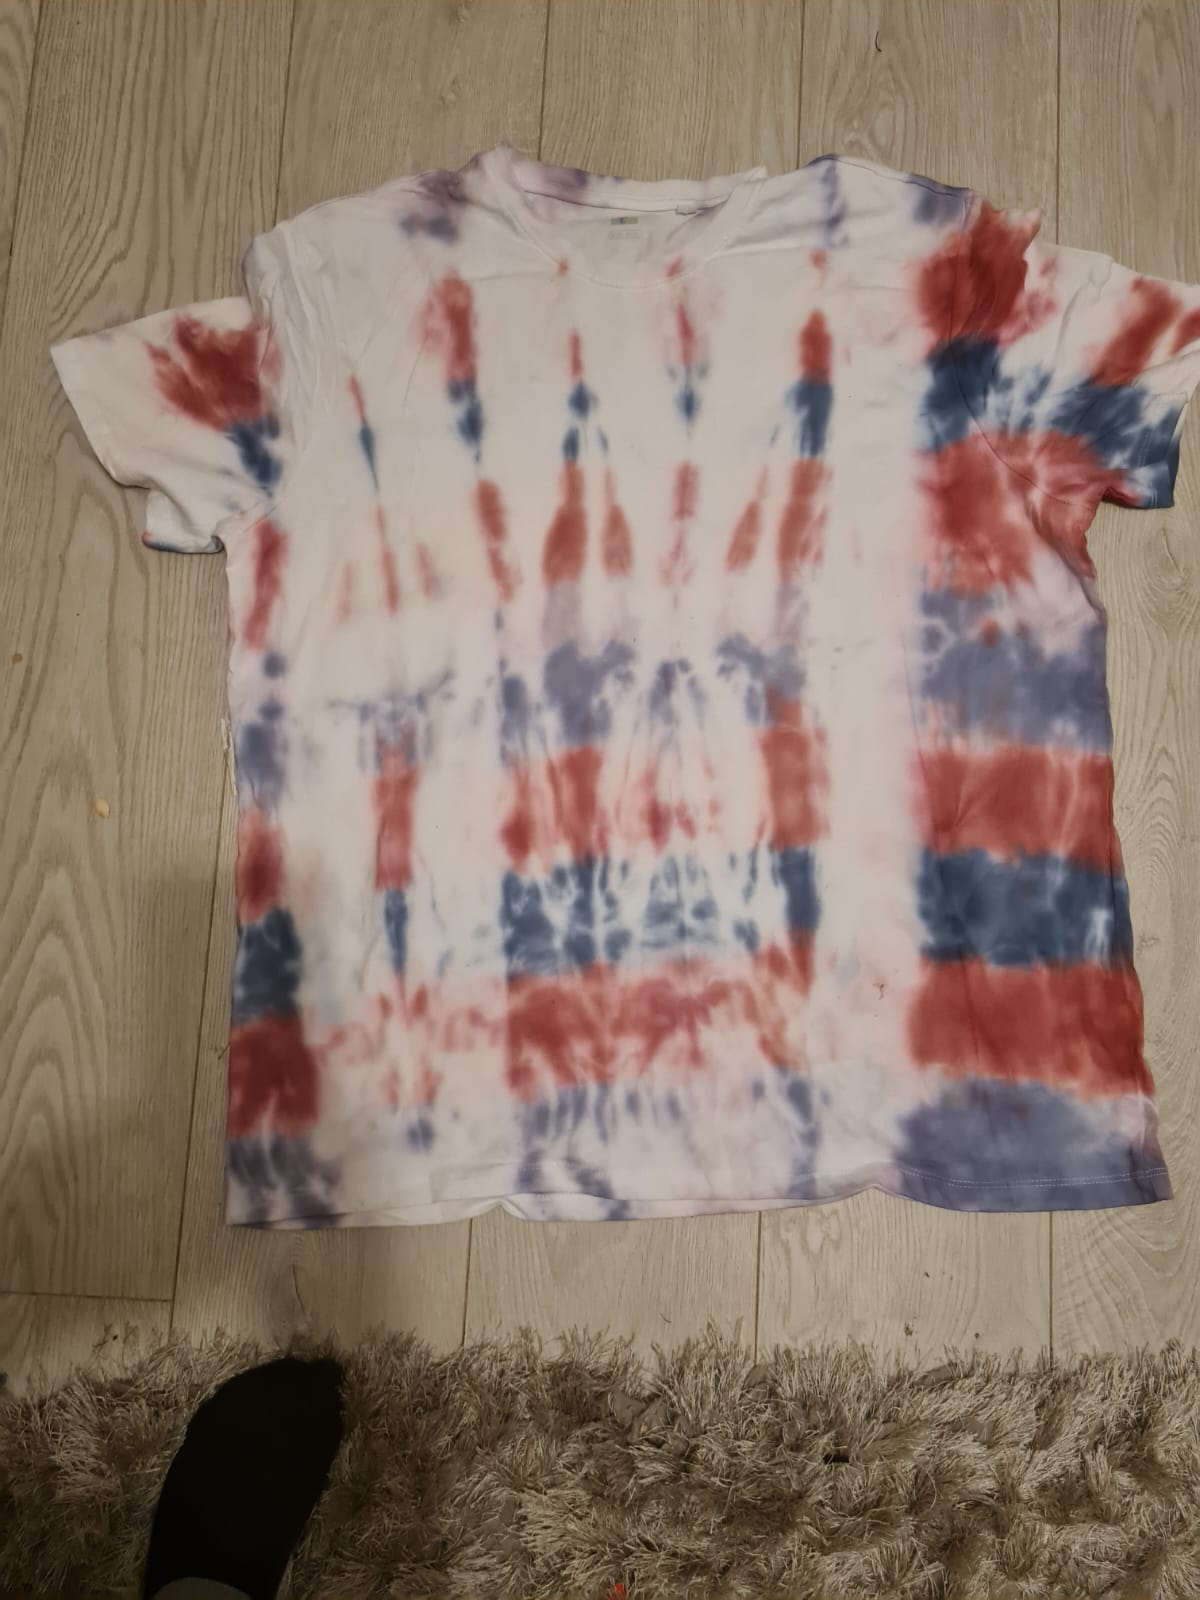 Photo shows a tie-dyed shirt with paints of red and blue